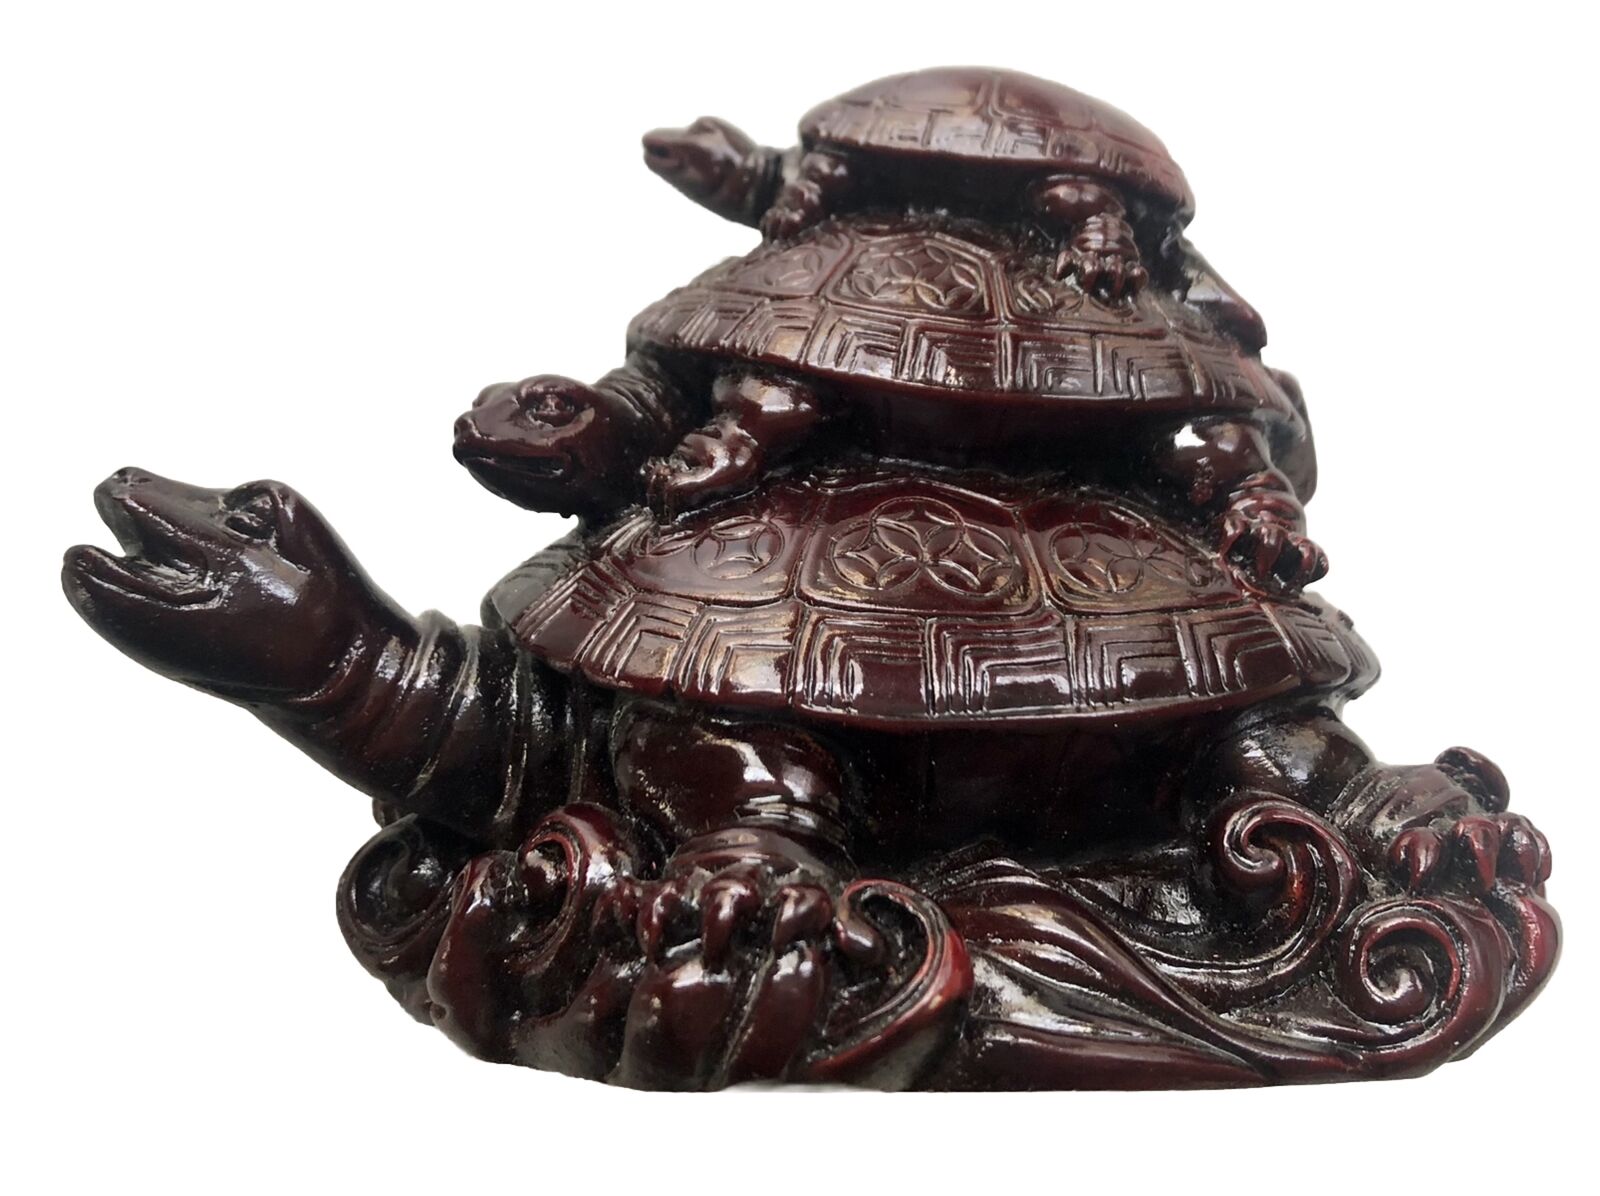 3 Generations Stacked Turtles Red Carved Figurine Feng Shui Wei Yi China Family